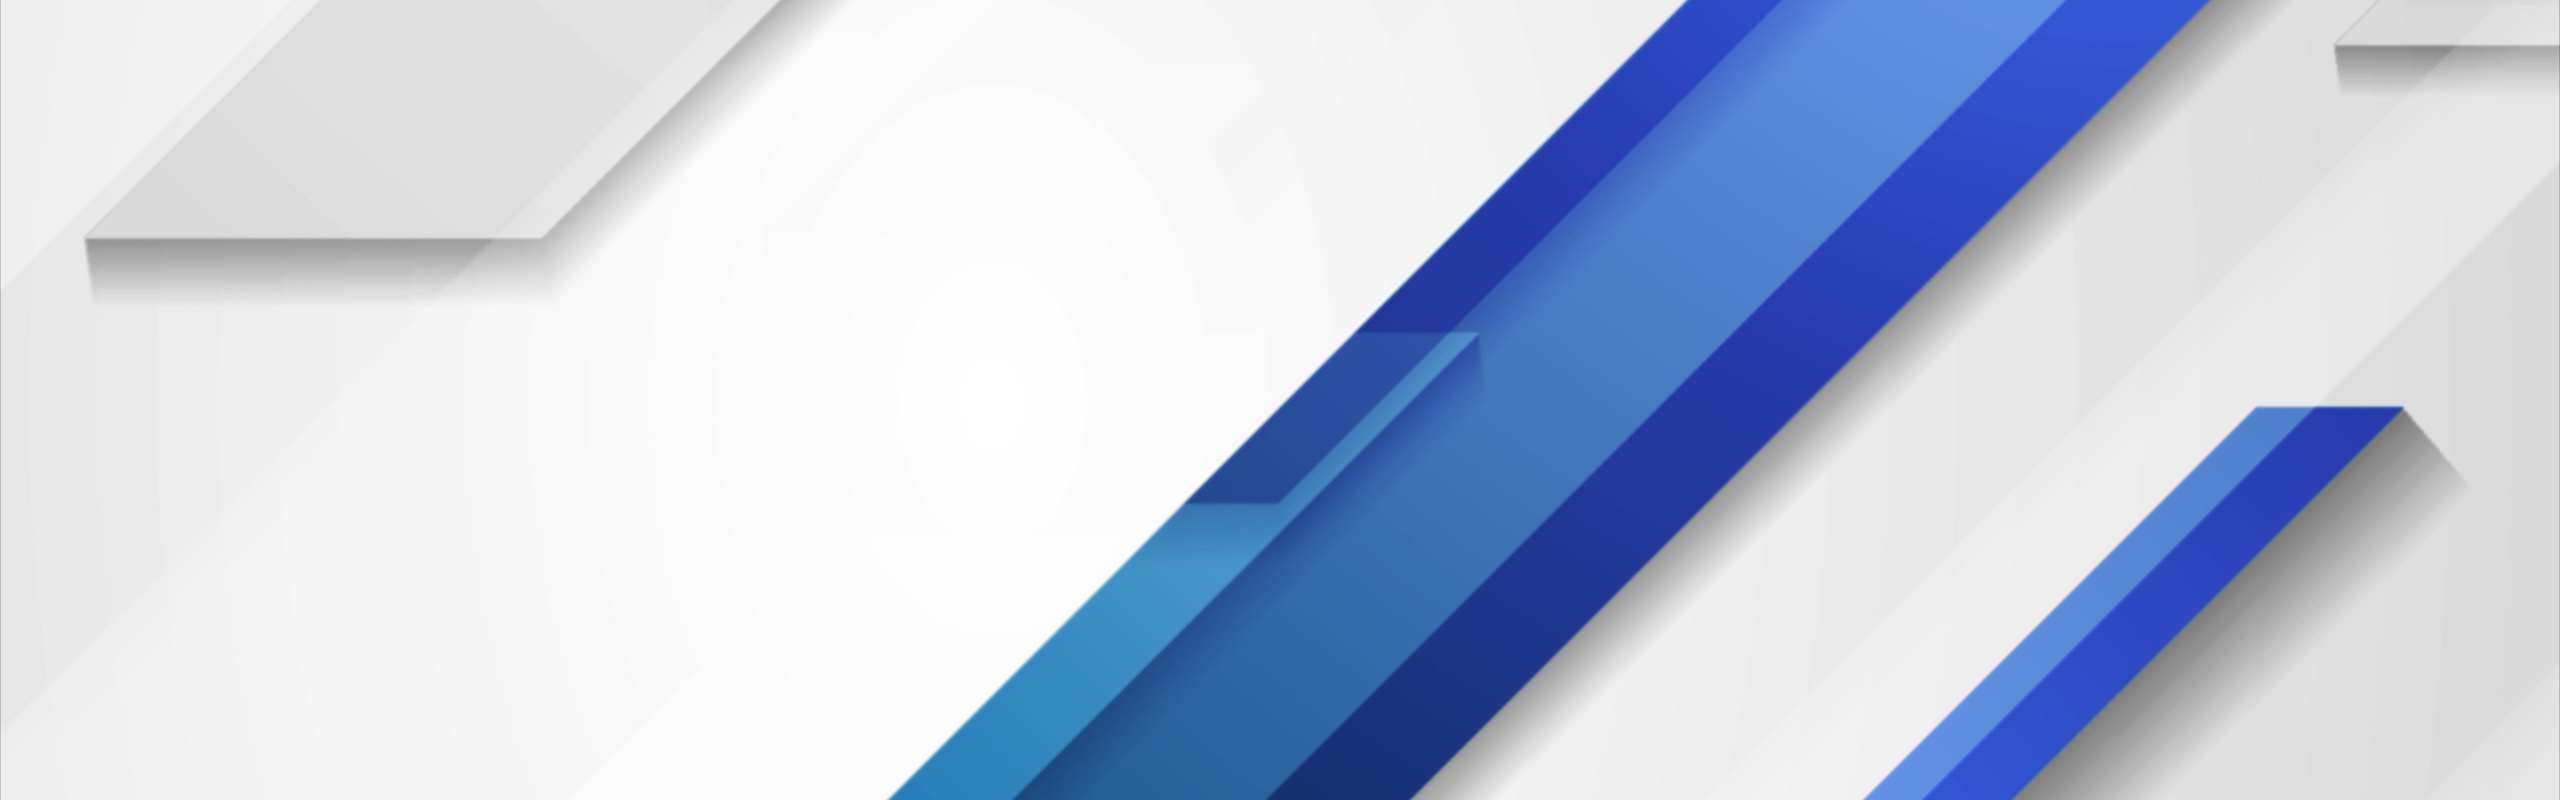 Generic blue and white graphic/background